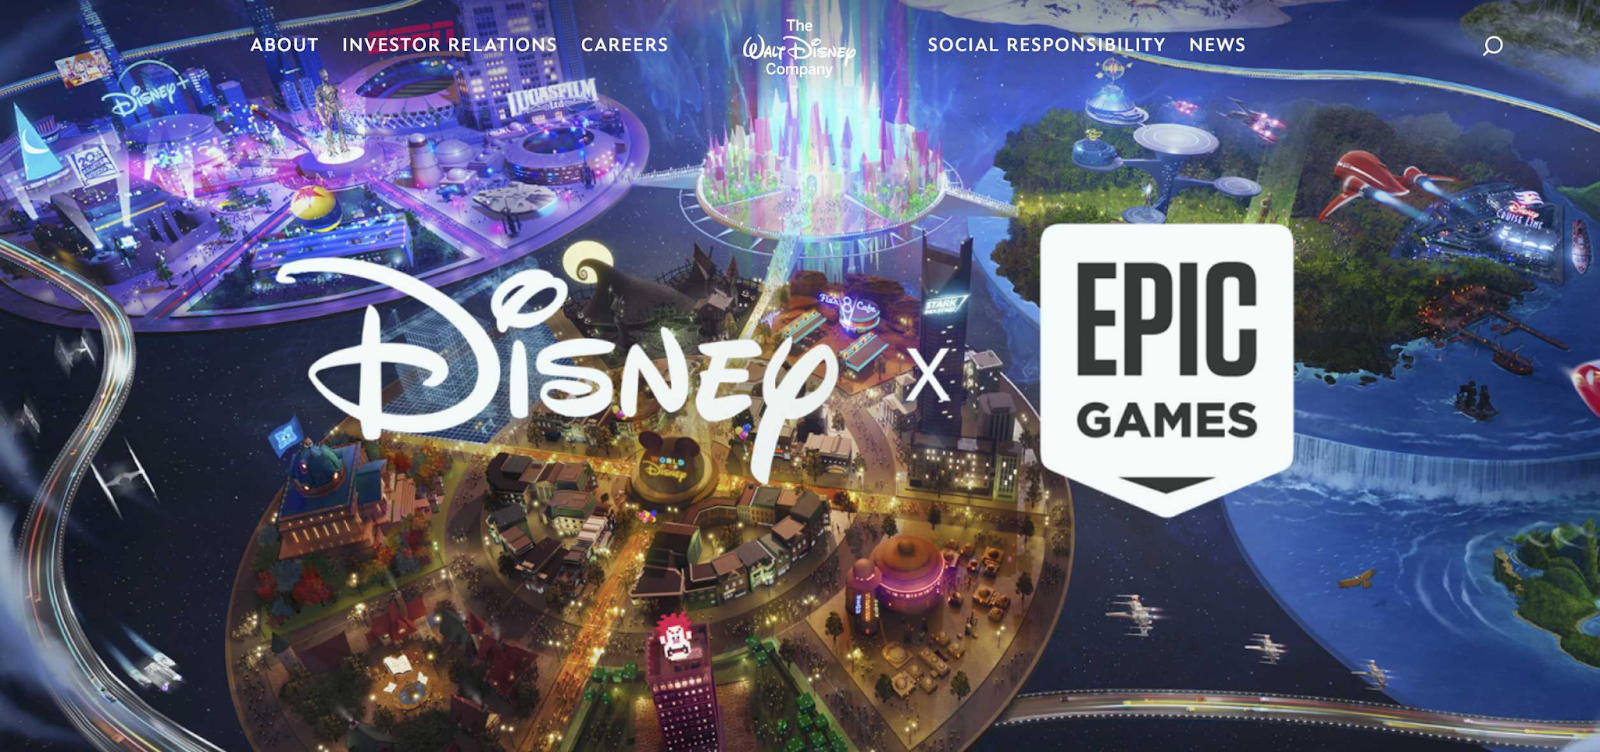 Disney and Epic Games landing page